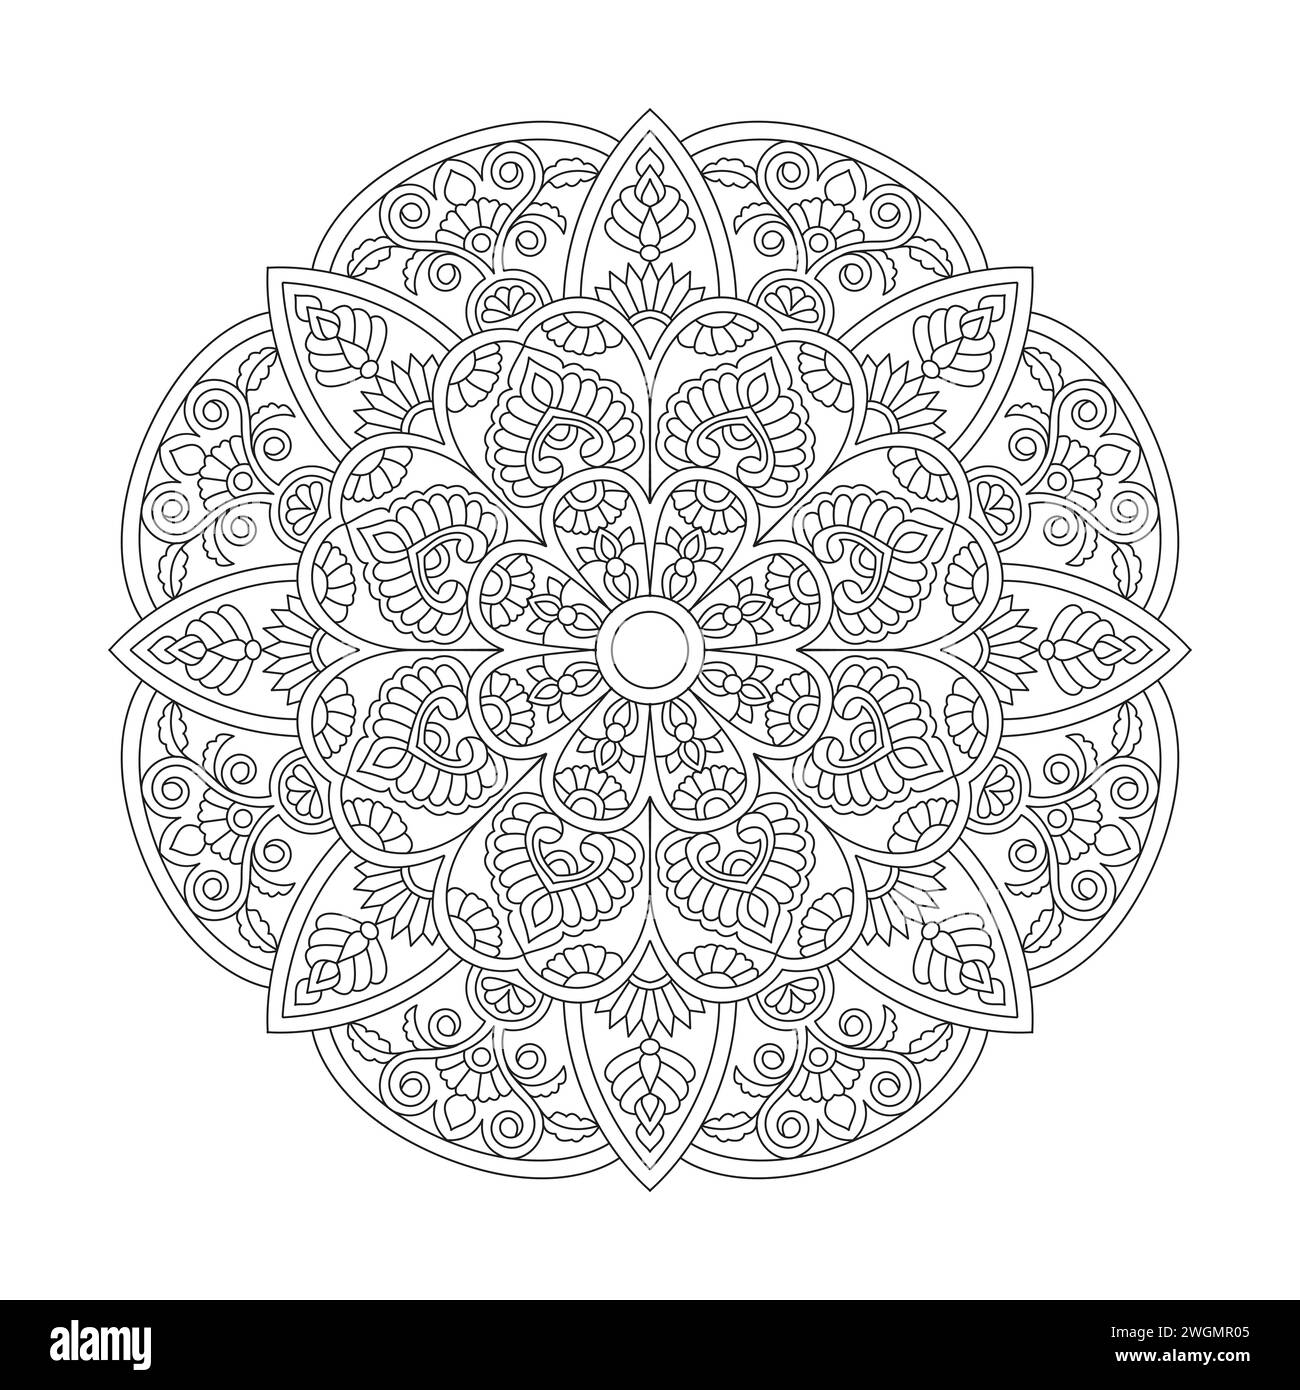 Peaceful Beautifull Mandala Coloring Book Page for kdp Book Interior. Peaceful Petals, Ability to Relax, Brain Experiences, Harmonious Haven, Peaceful Stock Vector